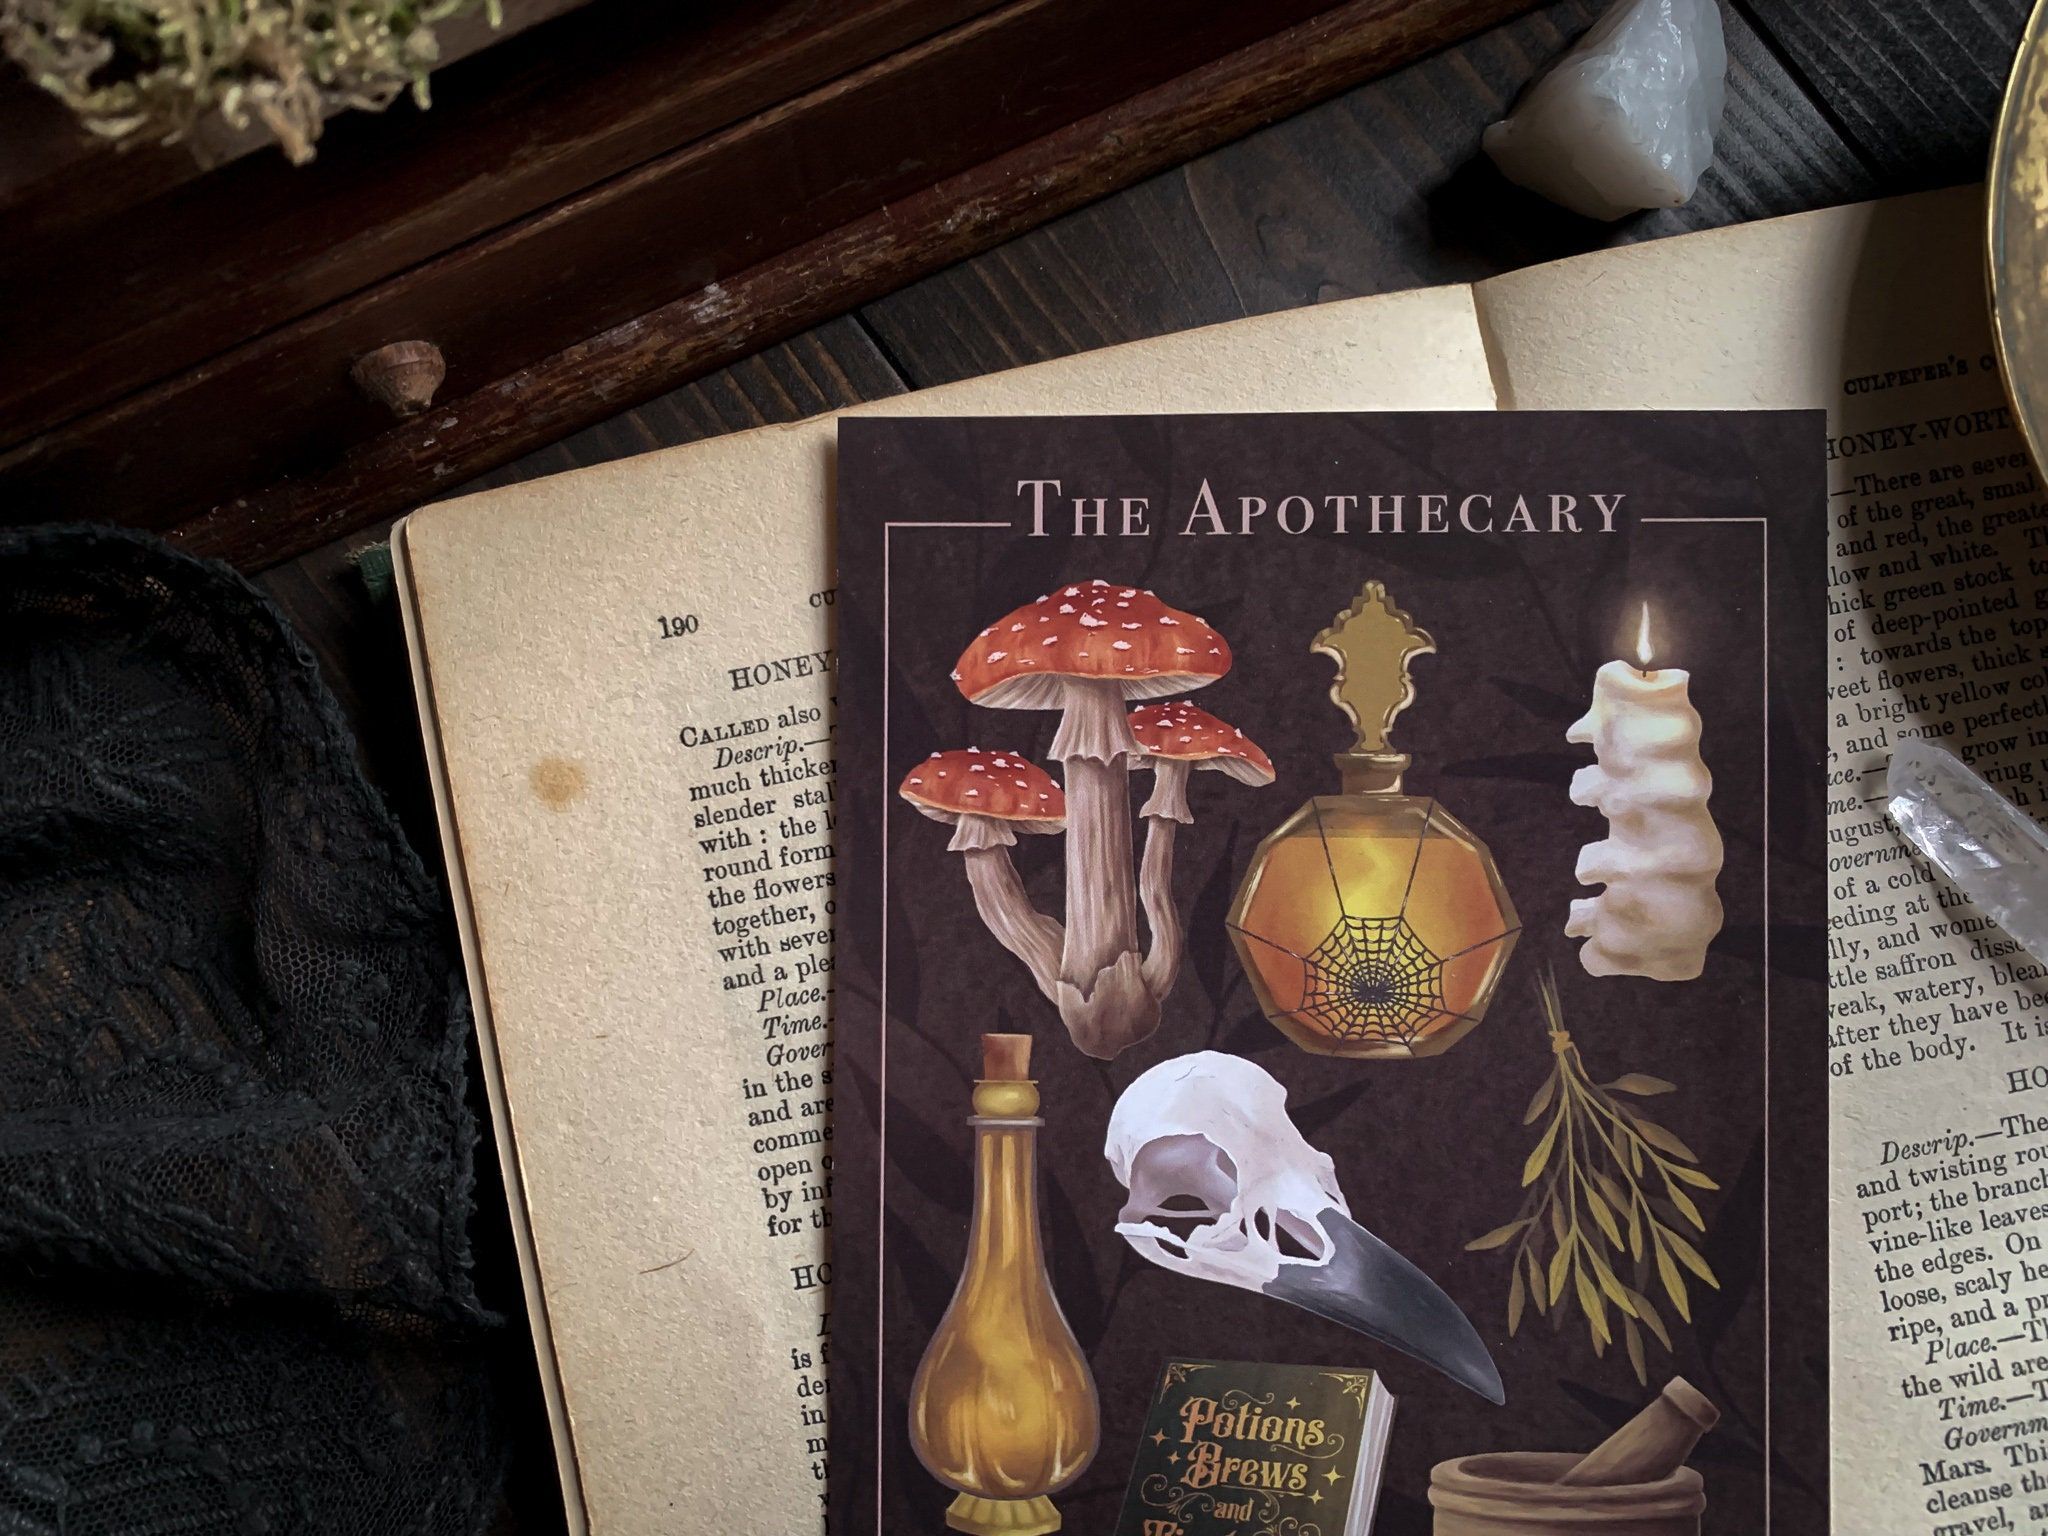 A5 print of The Apothecary illustration, featuring a toadstool, skull, spider's web, potion bottles and a raven. - Witchcore